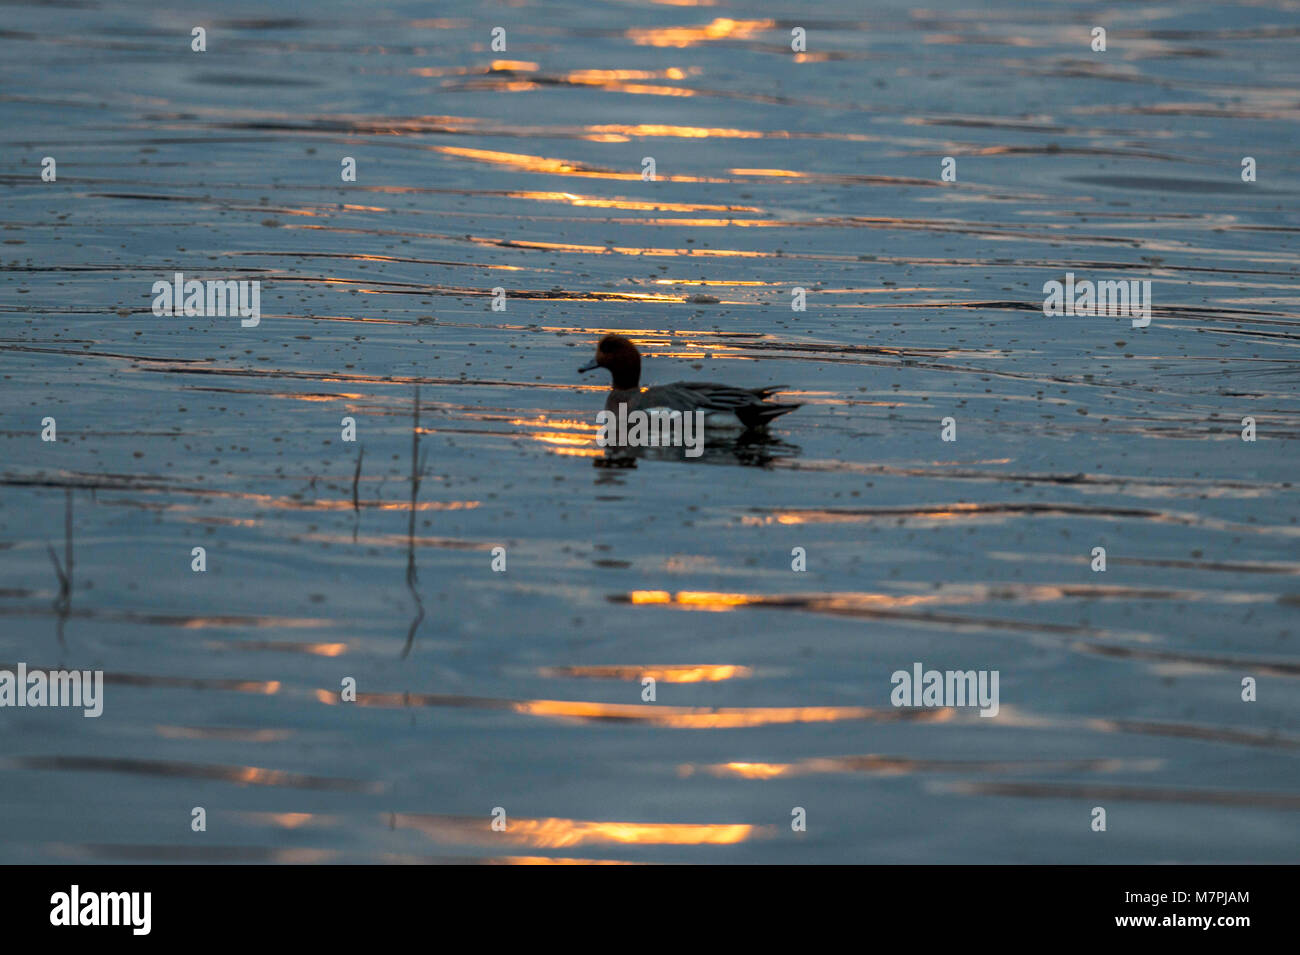 Wetland Birds sunset silhouette, waterfowl depicted at sunset, silhouetted against rippling estuary waters, bathed blue and gold shimmering light. Stock Photo